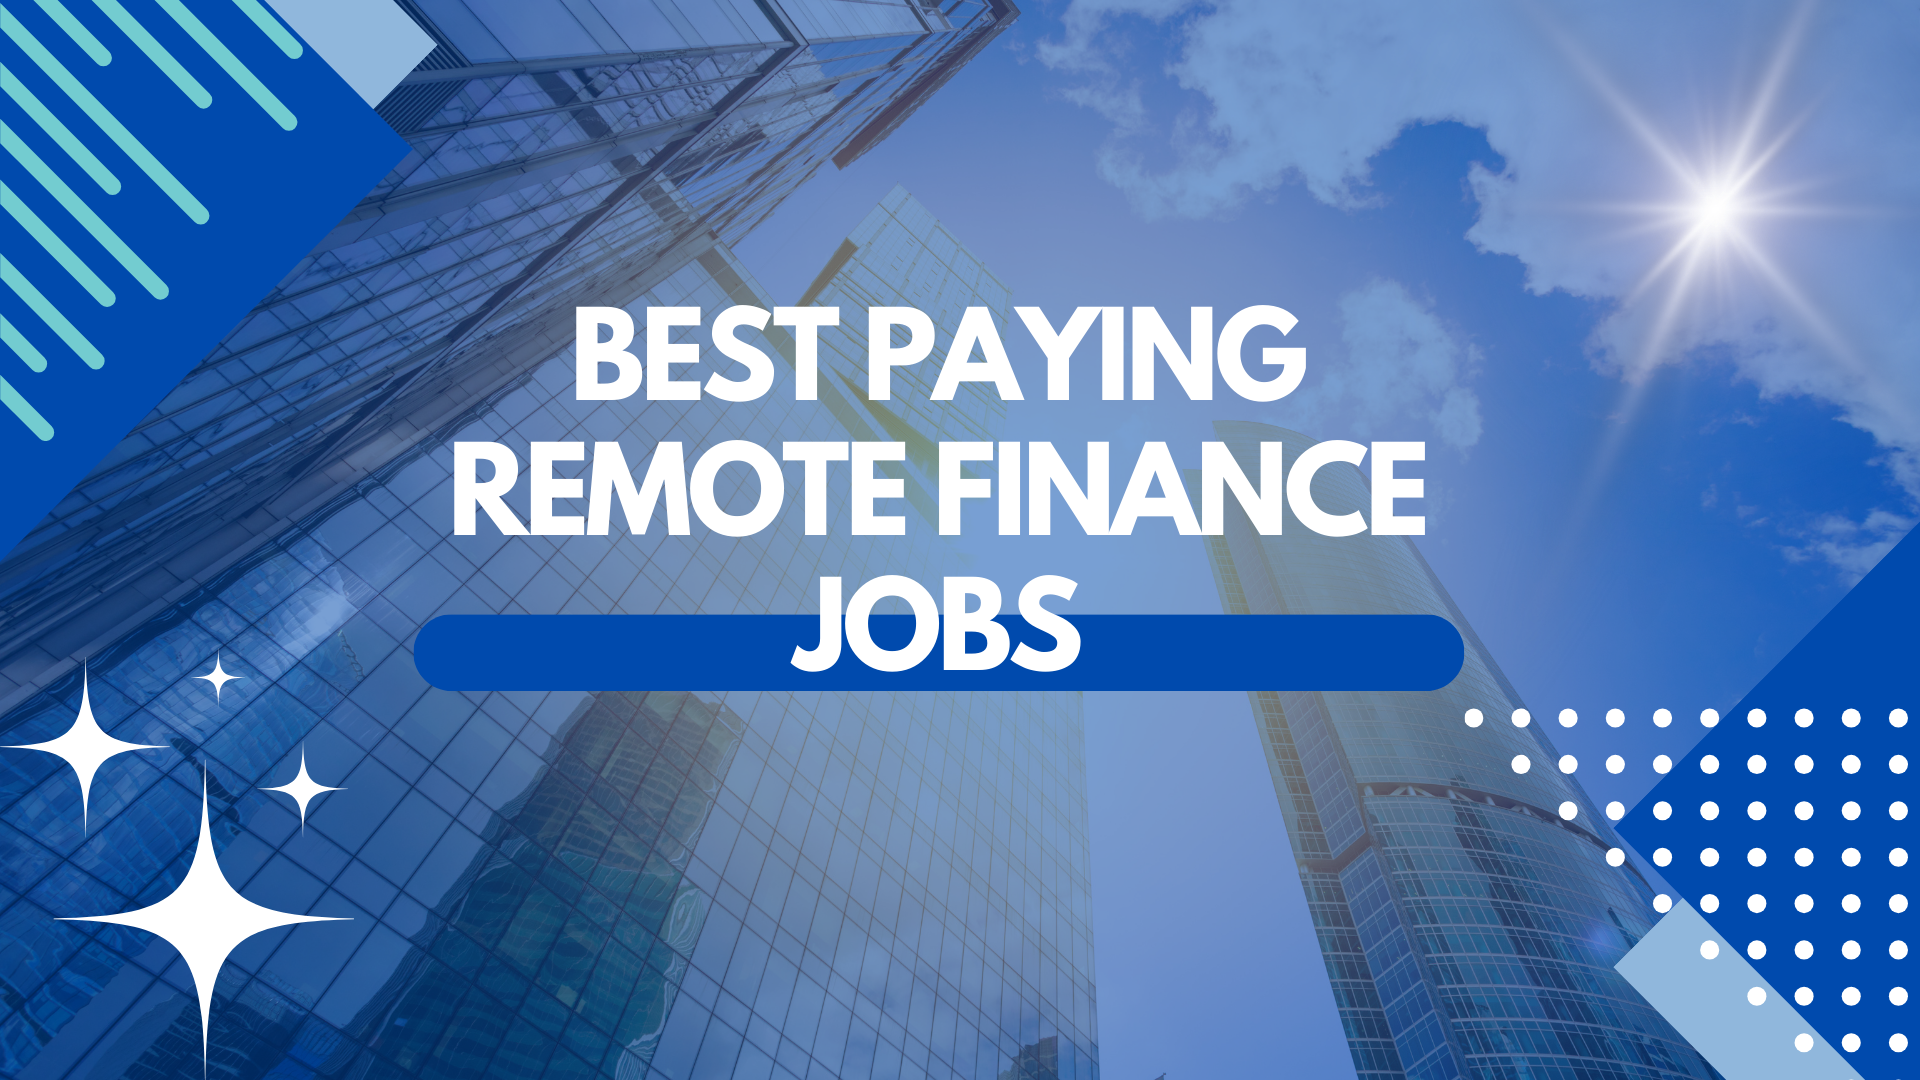 Best Paying Remote Finance Jobs